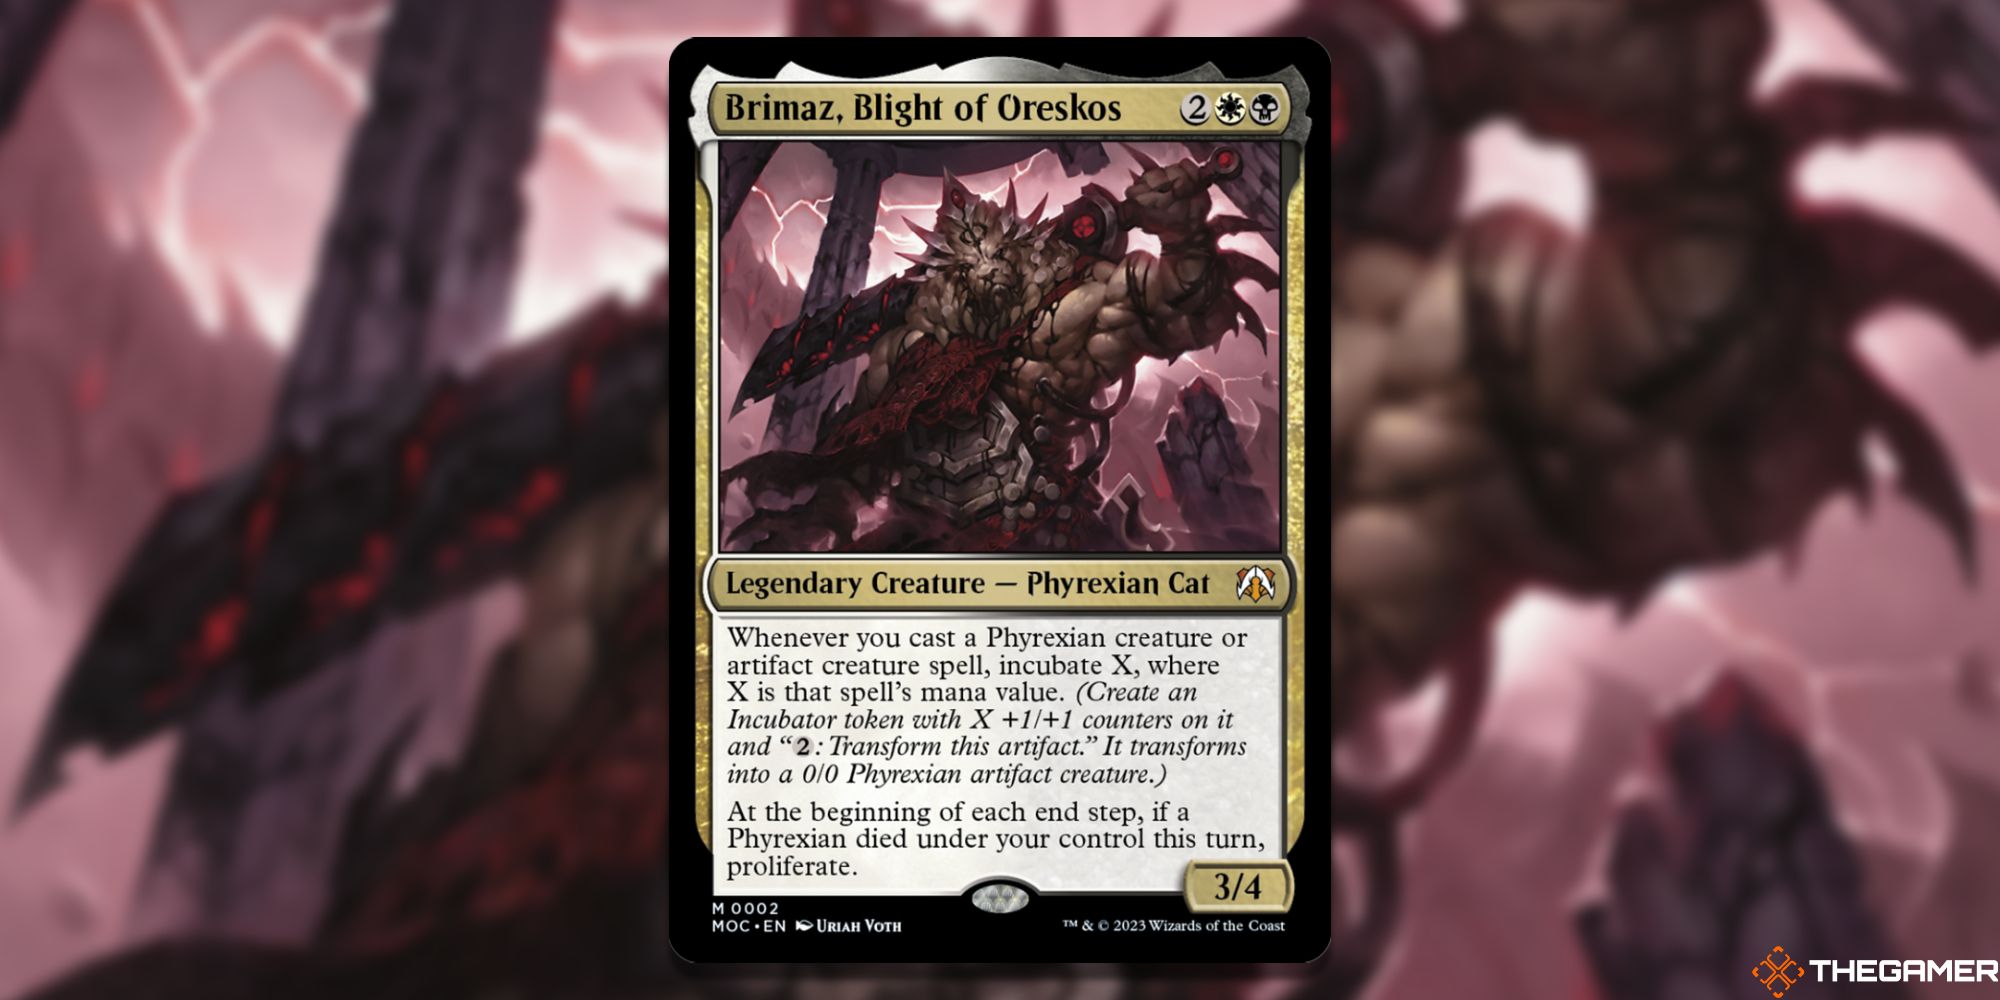 Image of the Brimaz Blight of Oreskos card in Magic: The Gathering, with art by Uriah Yoth